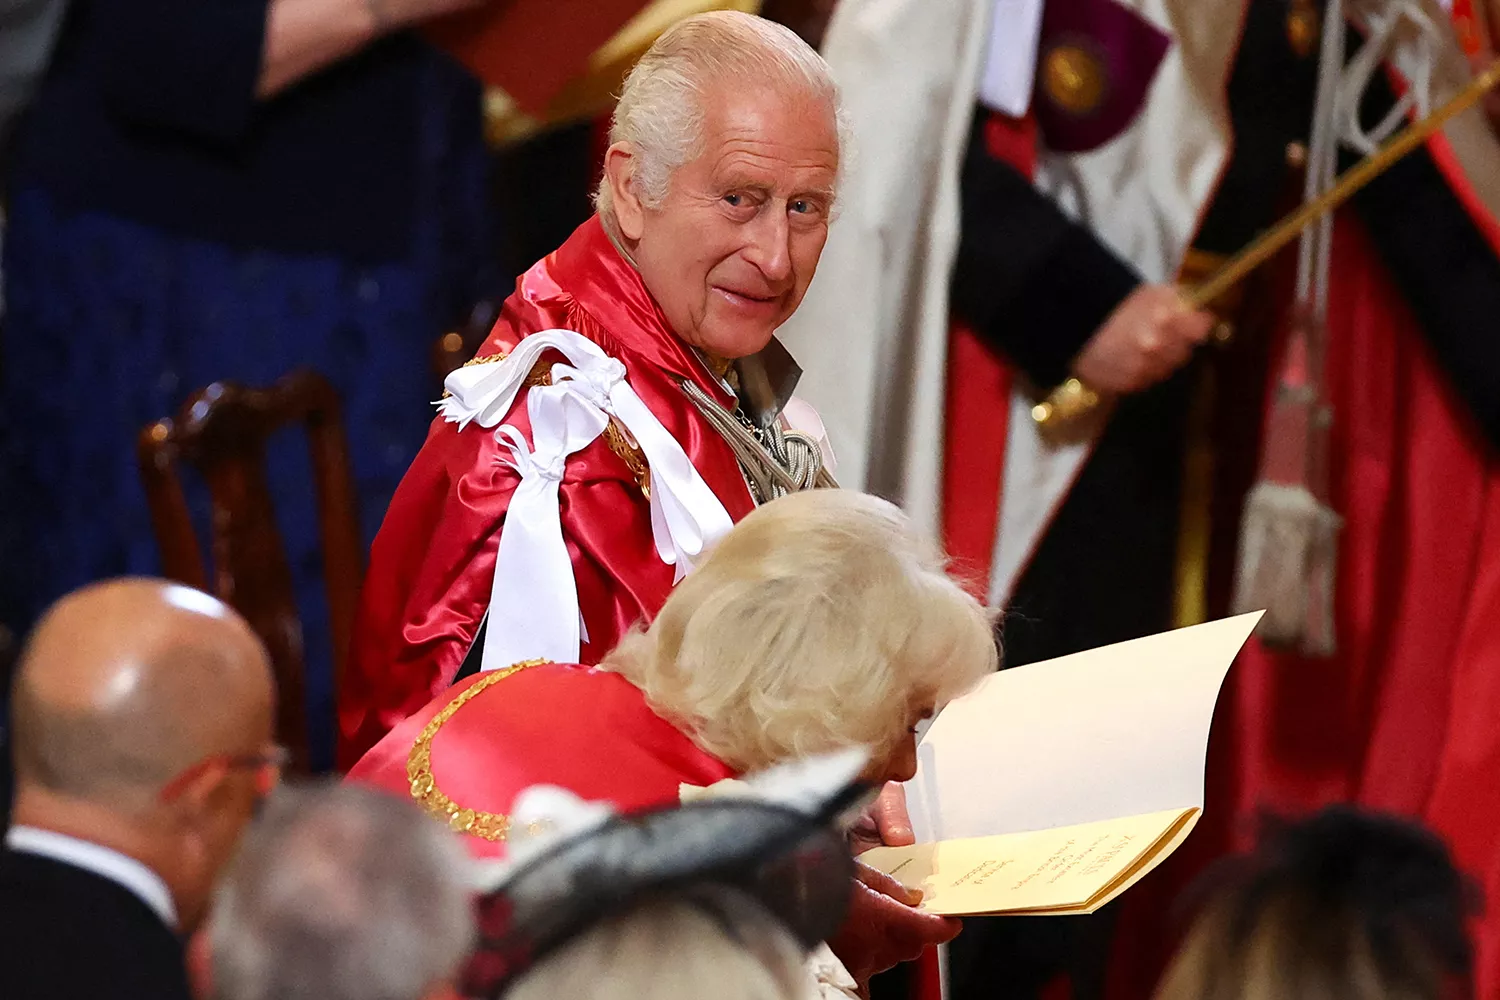 King Charles III and Britain's Queen Camilla attend a Service of Dedication for the Order of the British Empire, at St Paul's Cathedral